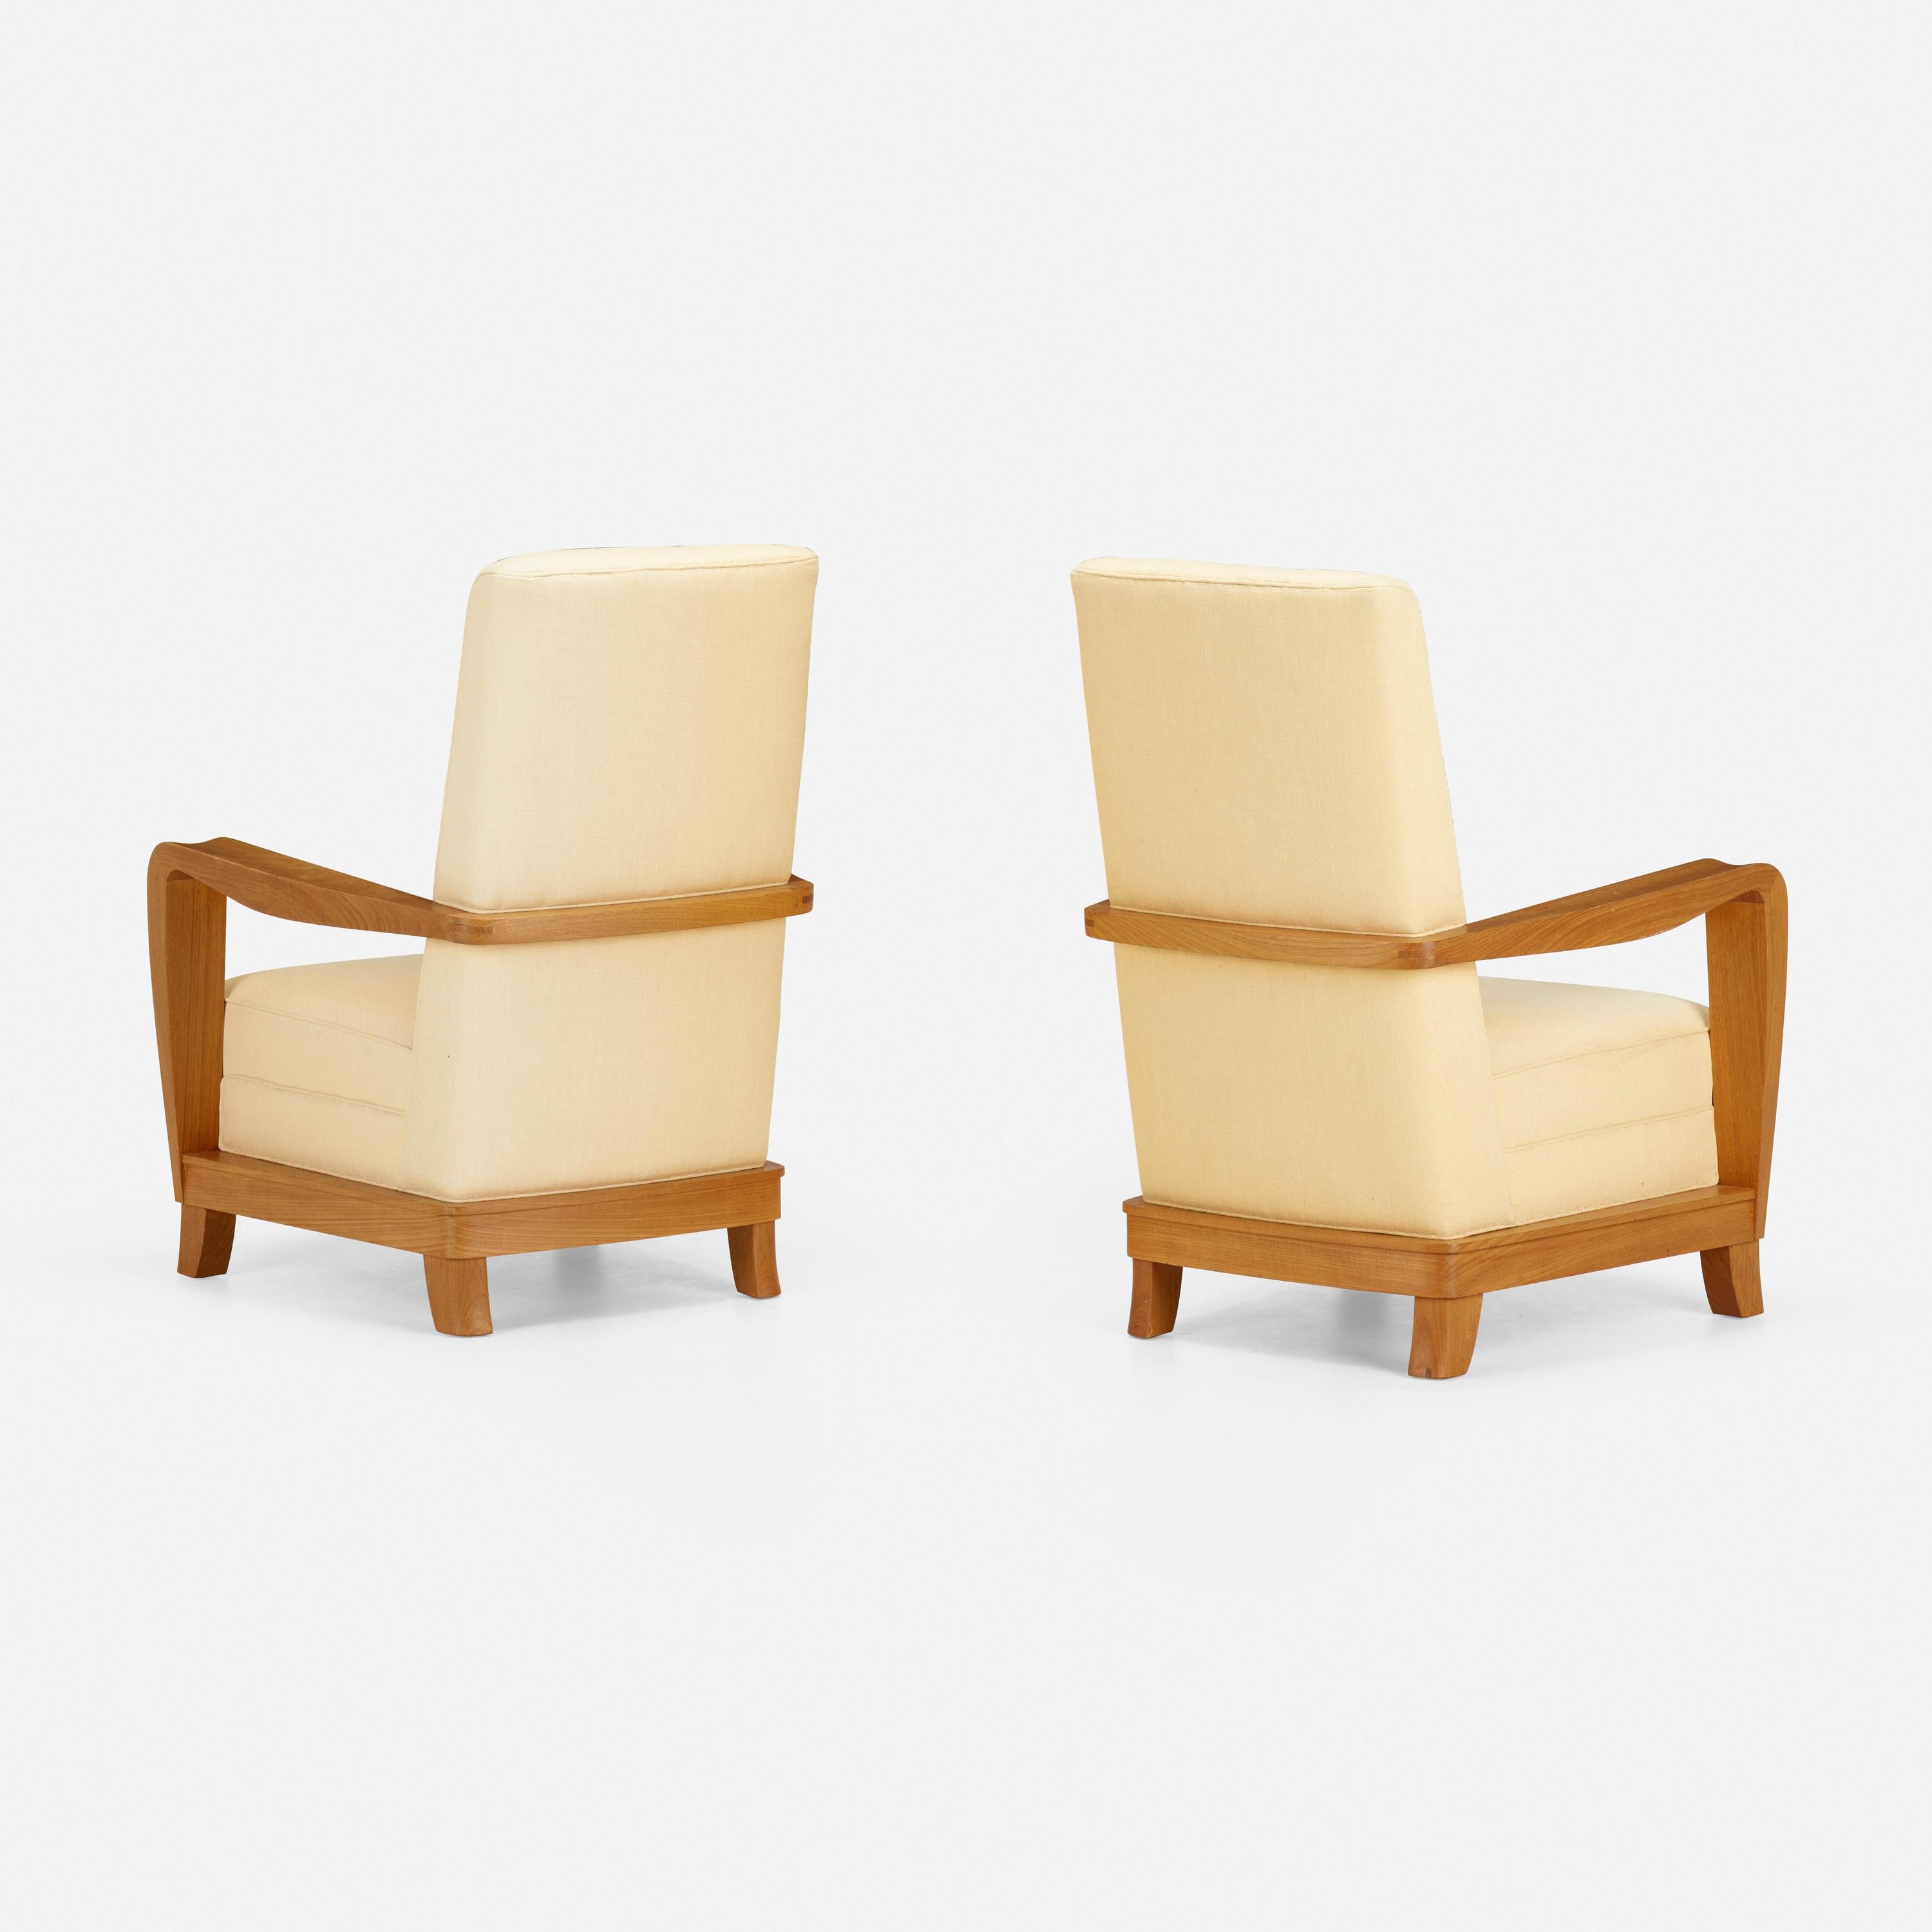 Pair of bleached mahogany upholstered armchairs after a model by Maxime old.
brand new upholstered.